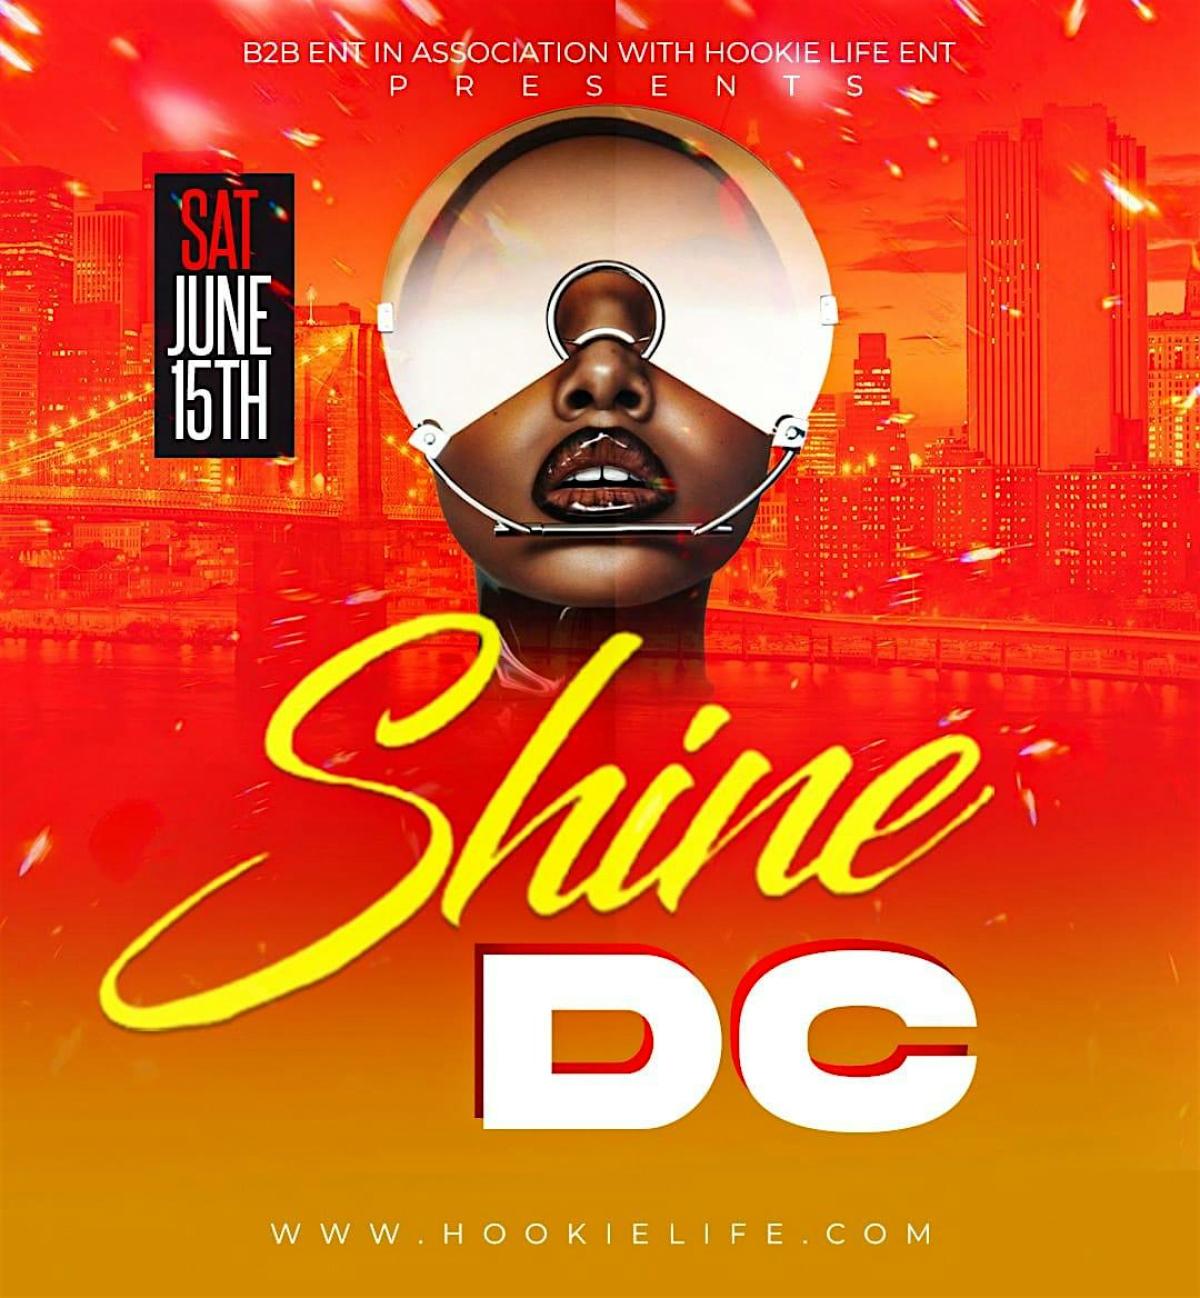 Shine D.C.  flyer or graphic.